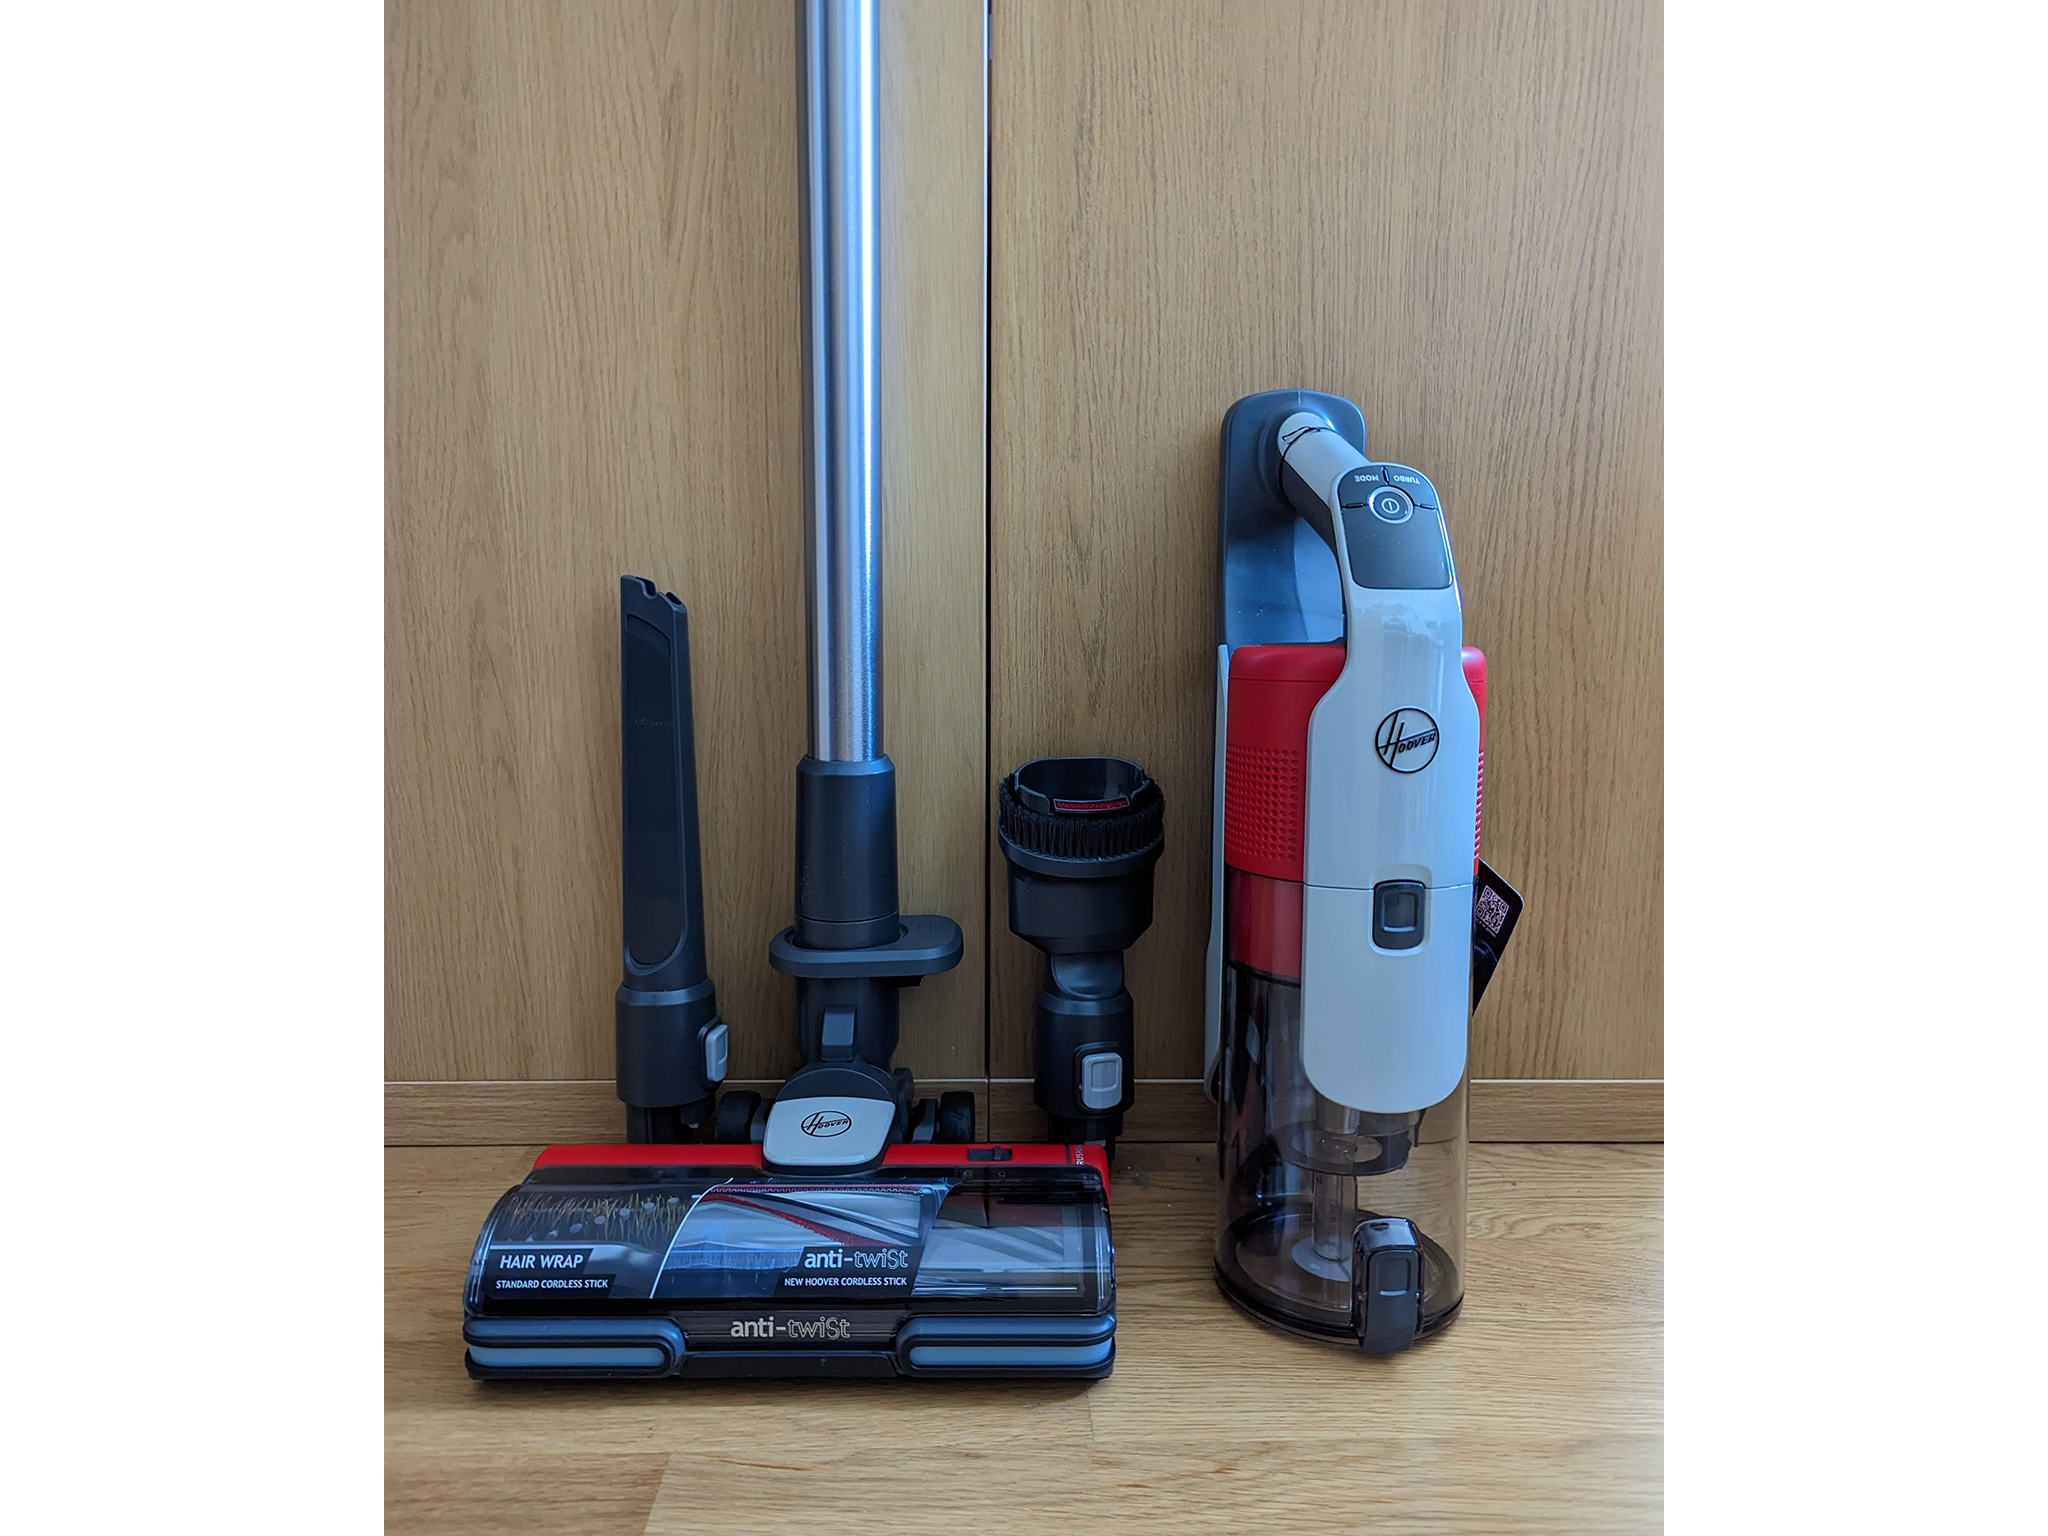 Hoover HF9 vacuum cleaner review: A cordless machine that gets the job done